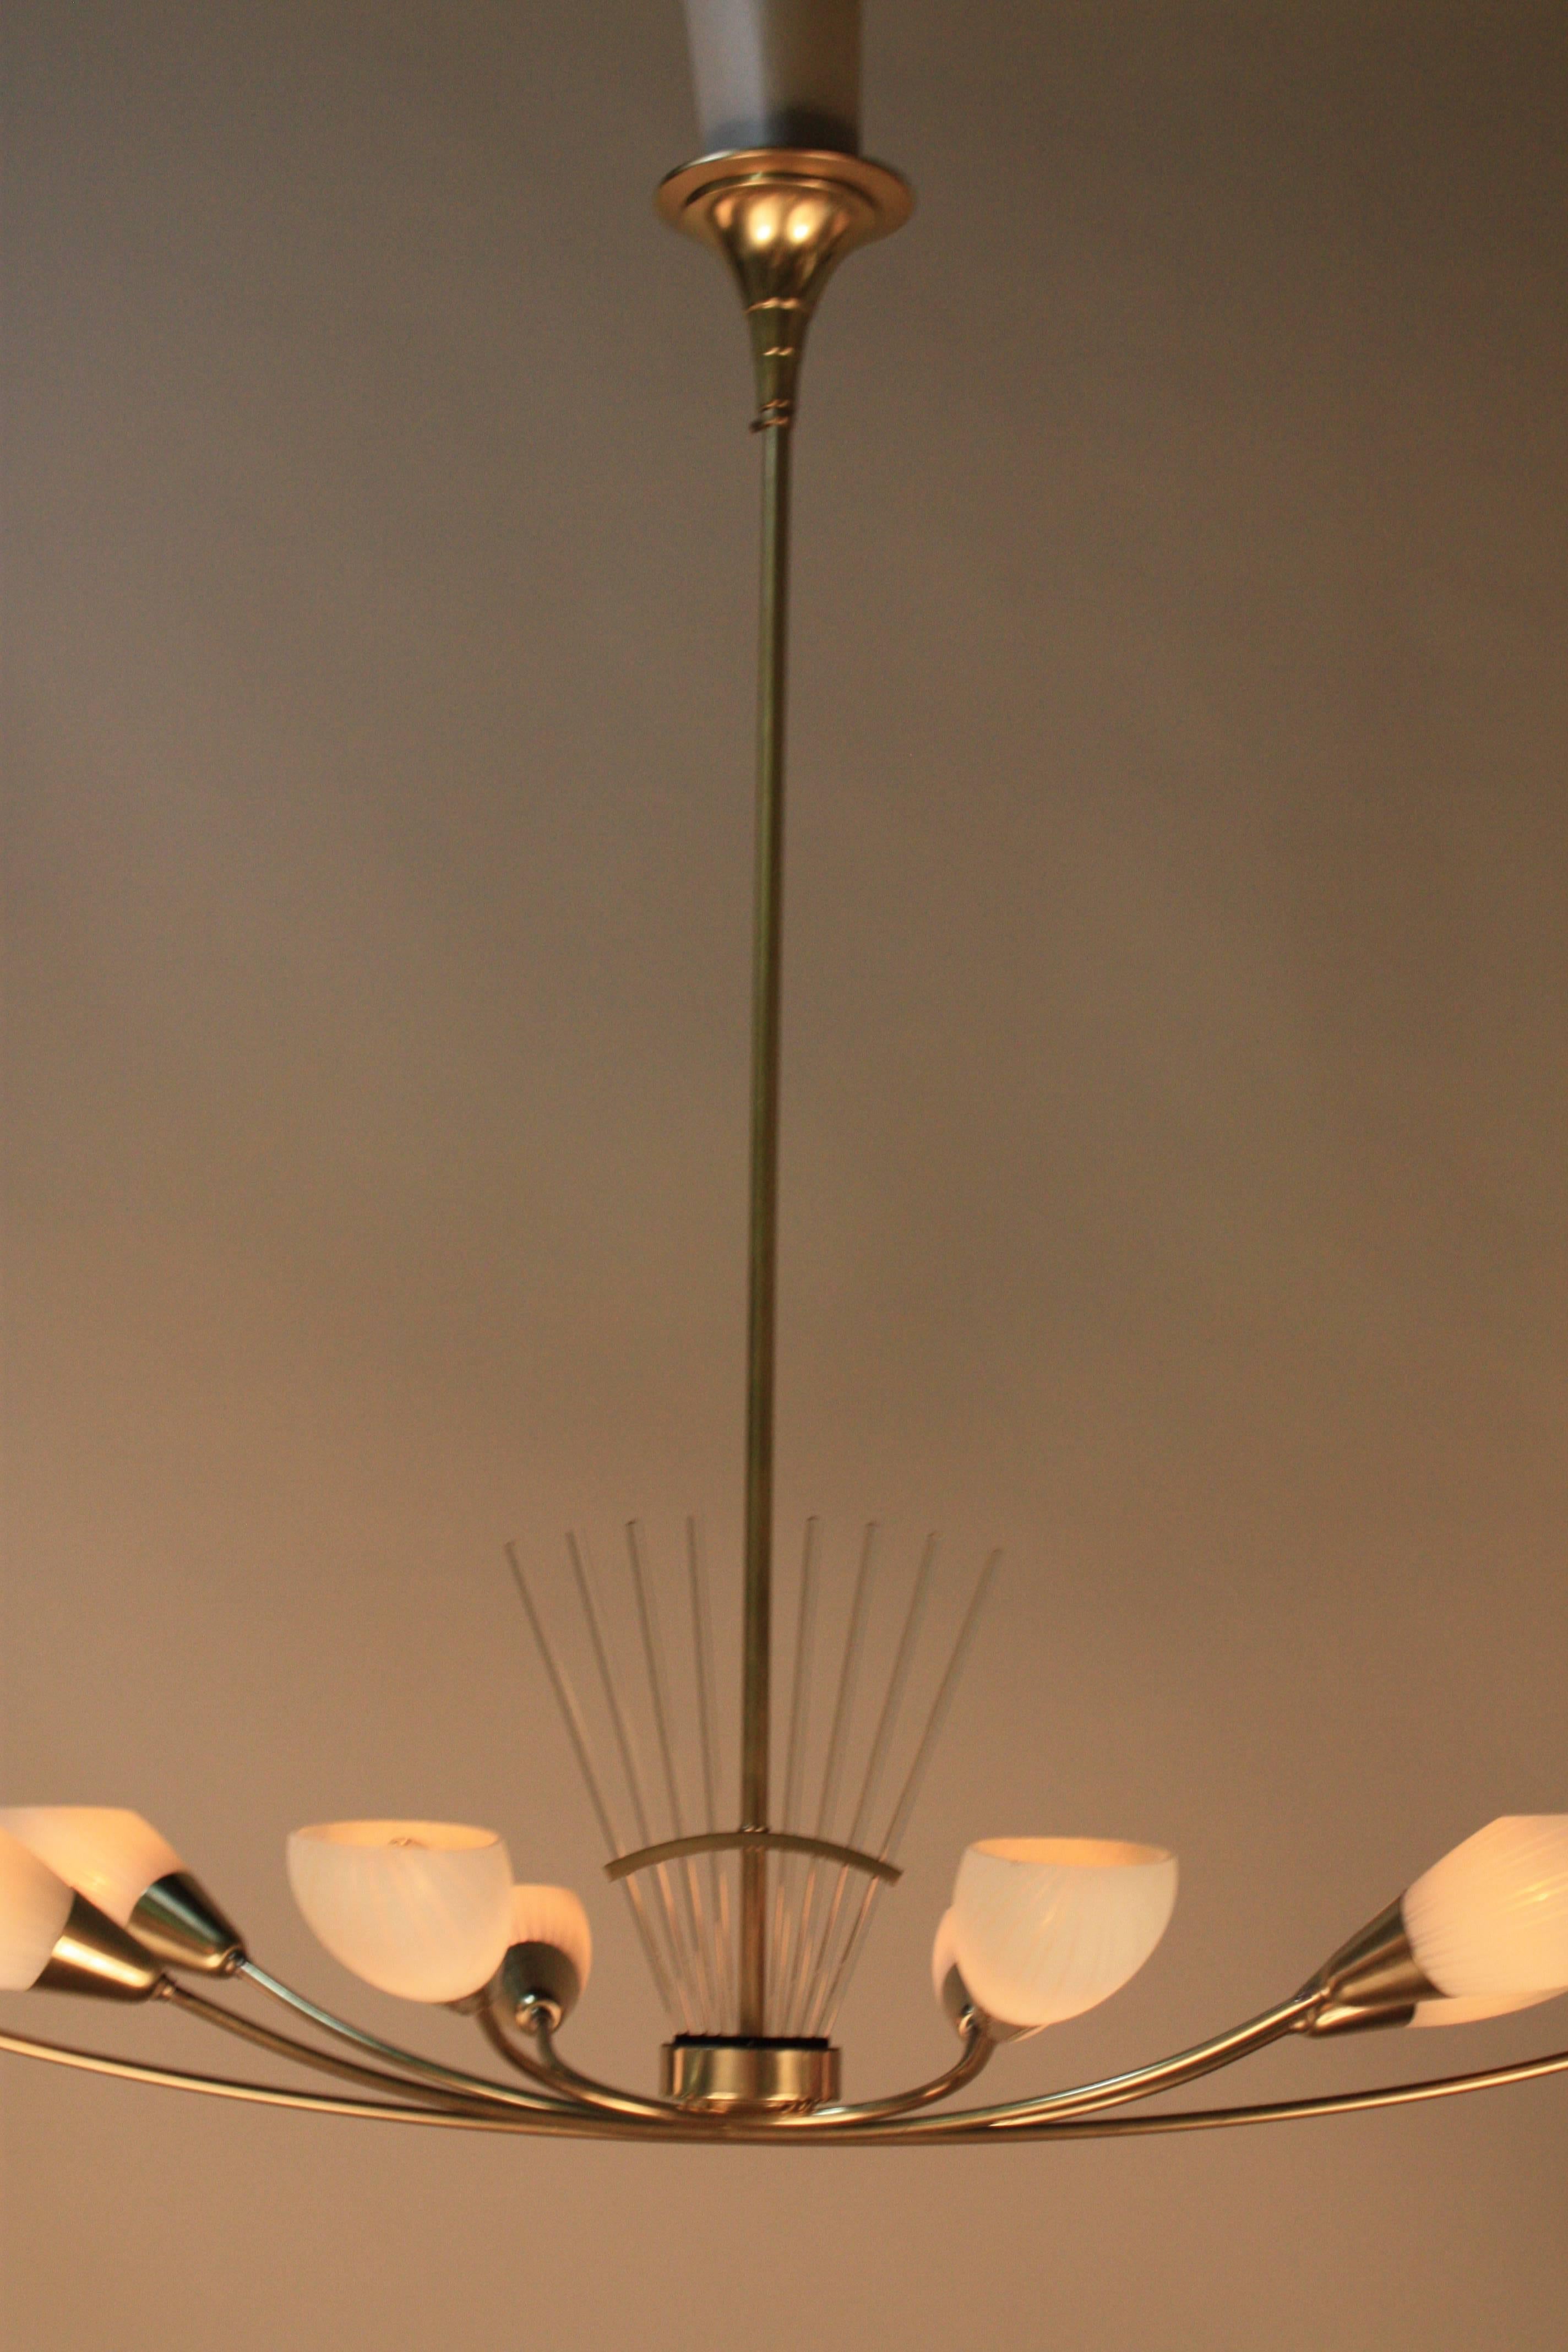 French Mid-Century Modern bronze chandelier designed with ten glass shades and crystal rod in the center.